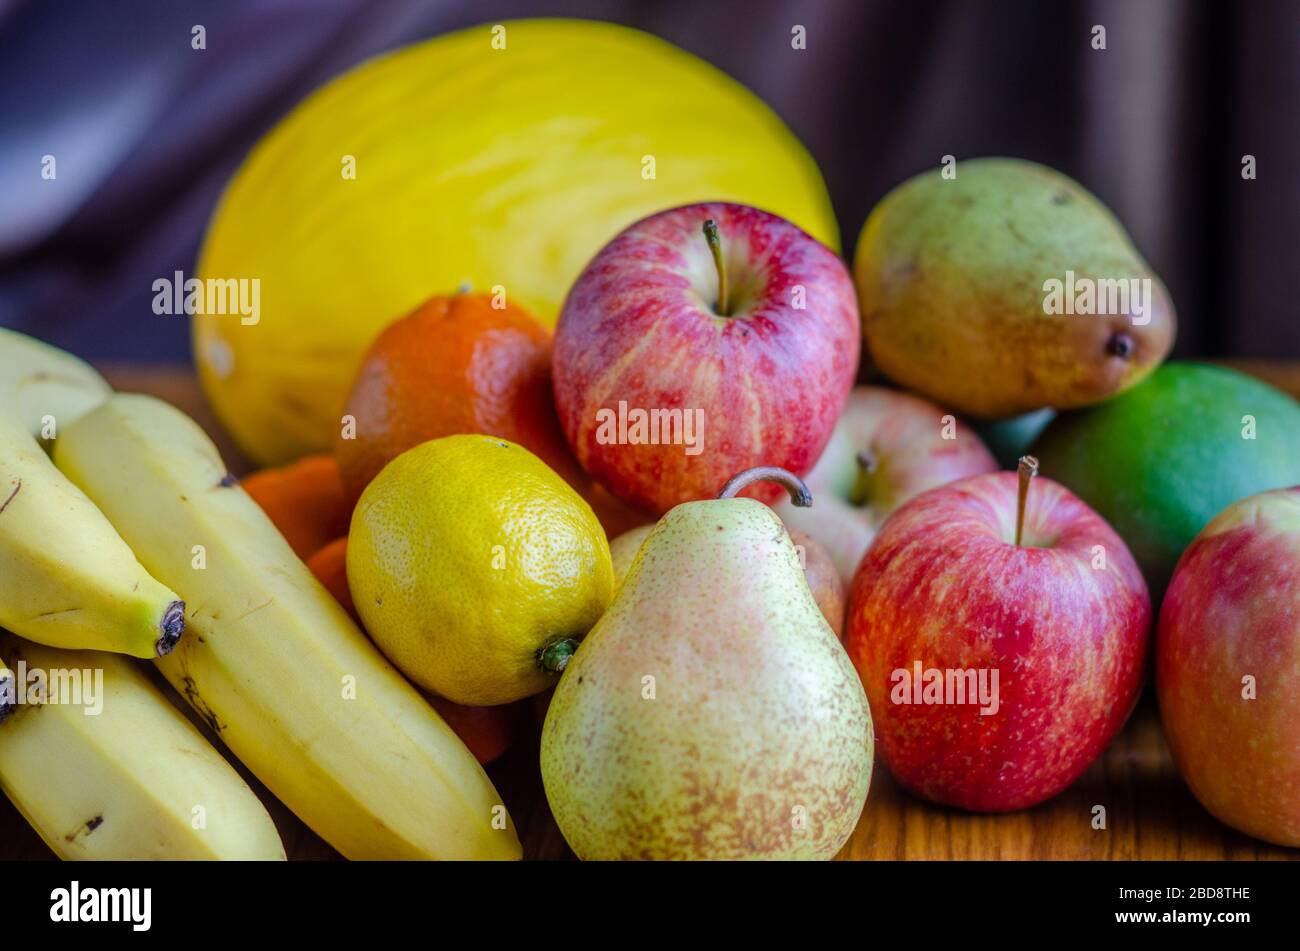 A still life shot with an assortment of different types of fruit including apples, mandarin oranges, melon, banana, pears, mango, lemon Stock Photo